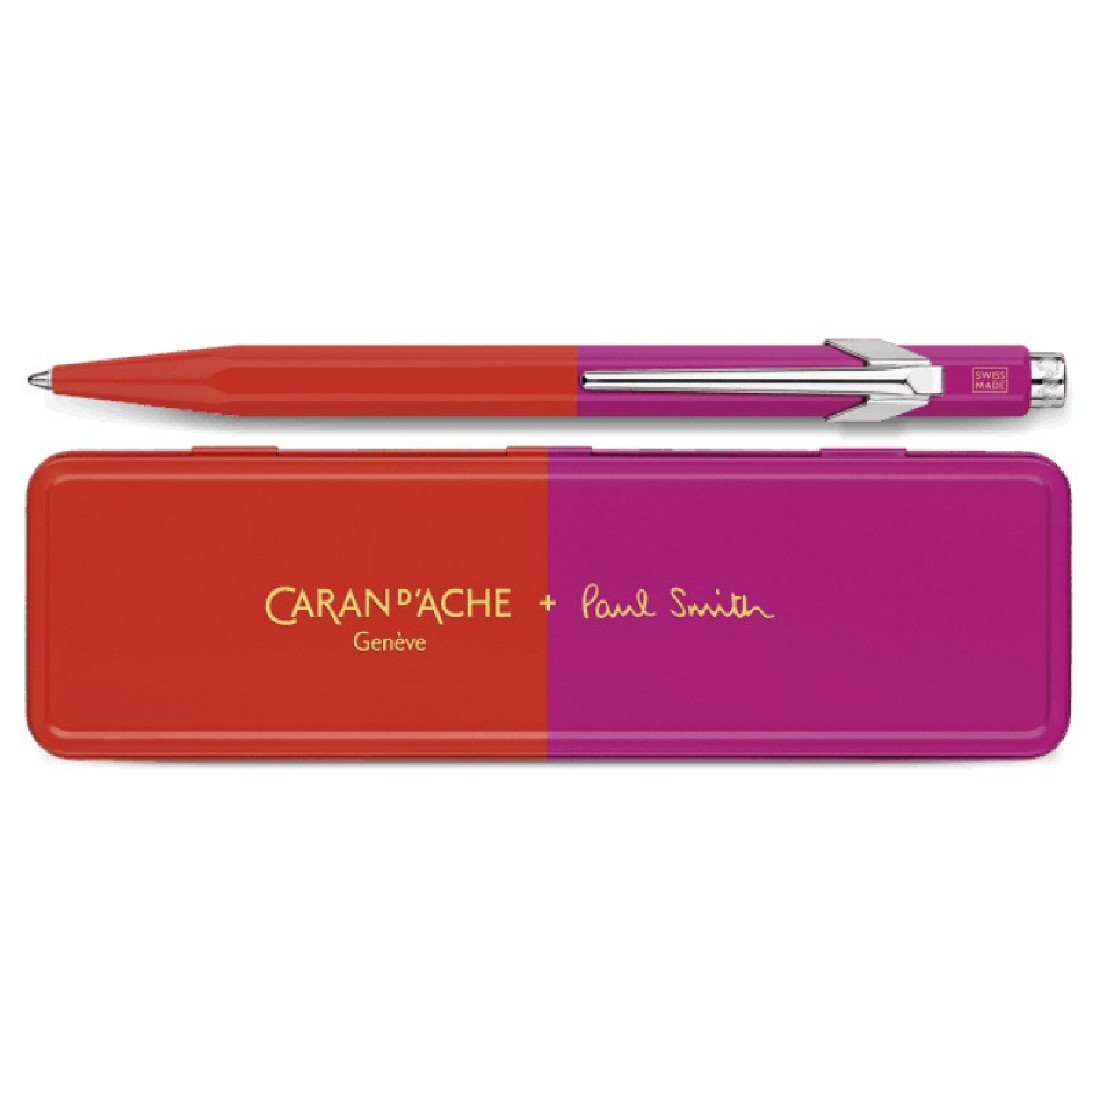 CARAN DACHE 849 Paul Smith warm red and melrose ballpoint pen, with holder